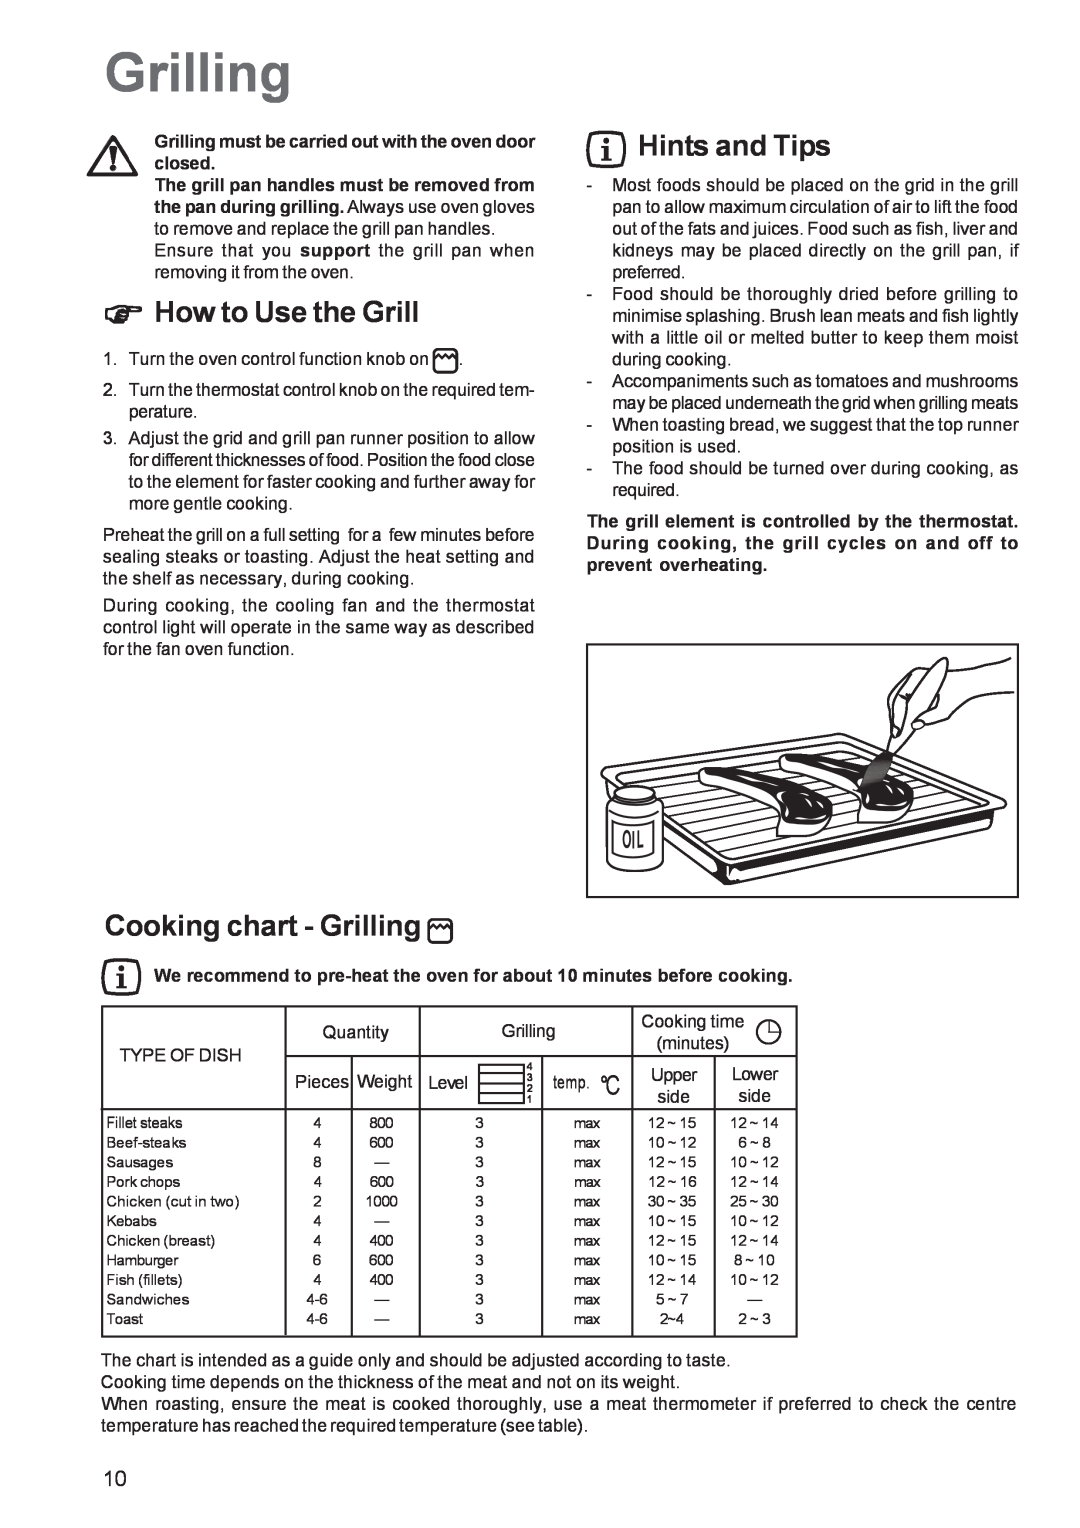 Tricity Bendix TBF 610 manual How to Use the Grill, Cooking chart - Grilling, Hints and Tips 